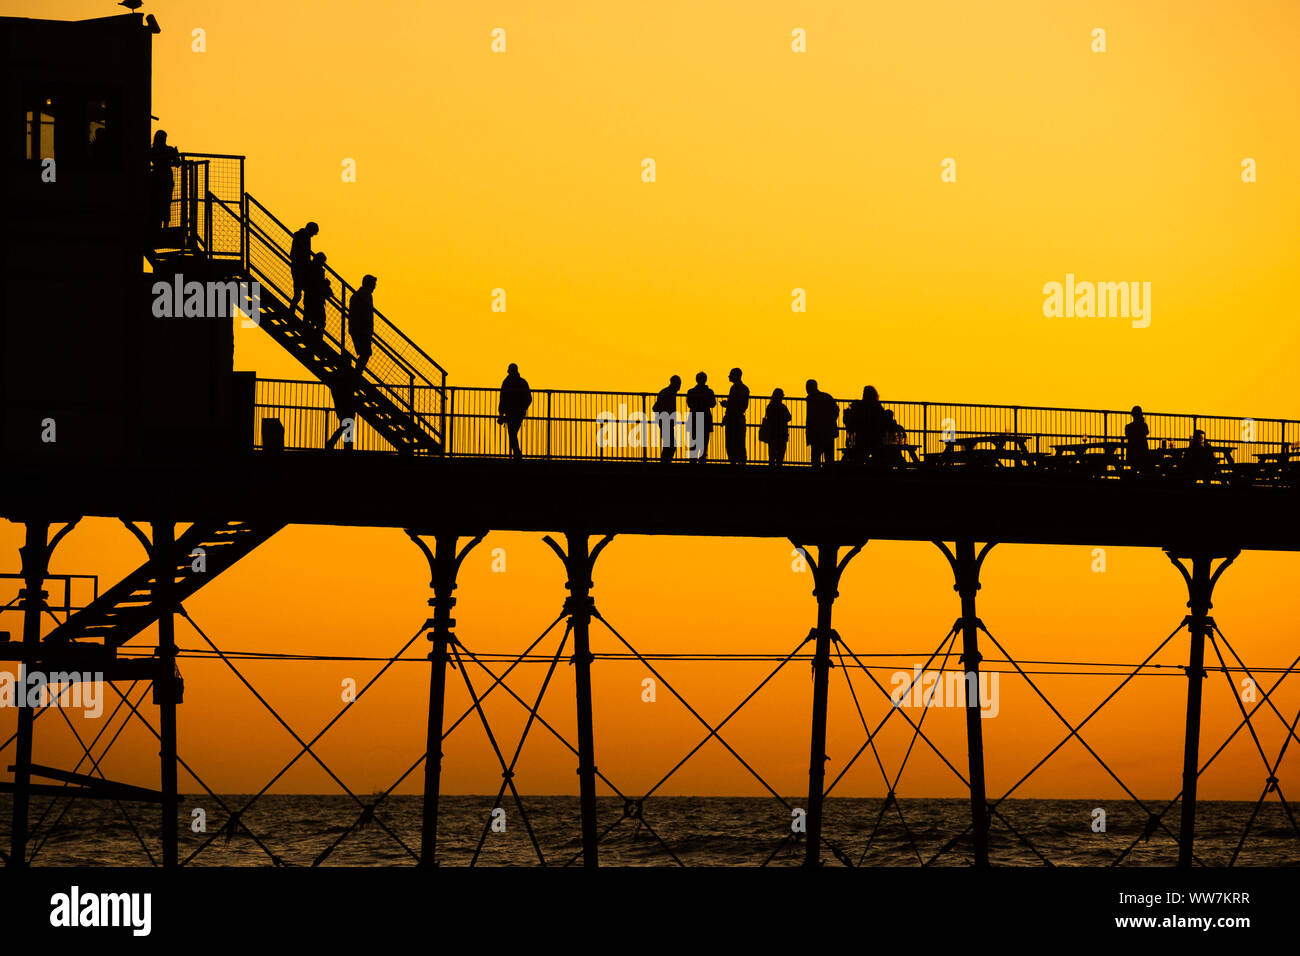 Aberystwyth Wales UK, Friday 13 September 2019 People standing on Aberystwyth’s Victorian seaside pier are silhouetted as they watch the last rays of the suns as it sets over Cardigan Bay, on a glorious early autumn evening, The weekend is expected to be warm and settled with temperatures in the mid 20’s Celsius in parts of the south east of the UK  Photo credit Keith Morris/Alamy Live News Stock Photo